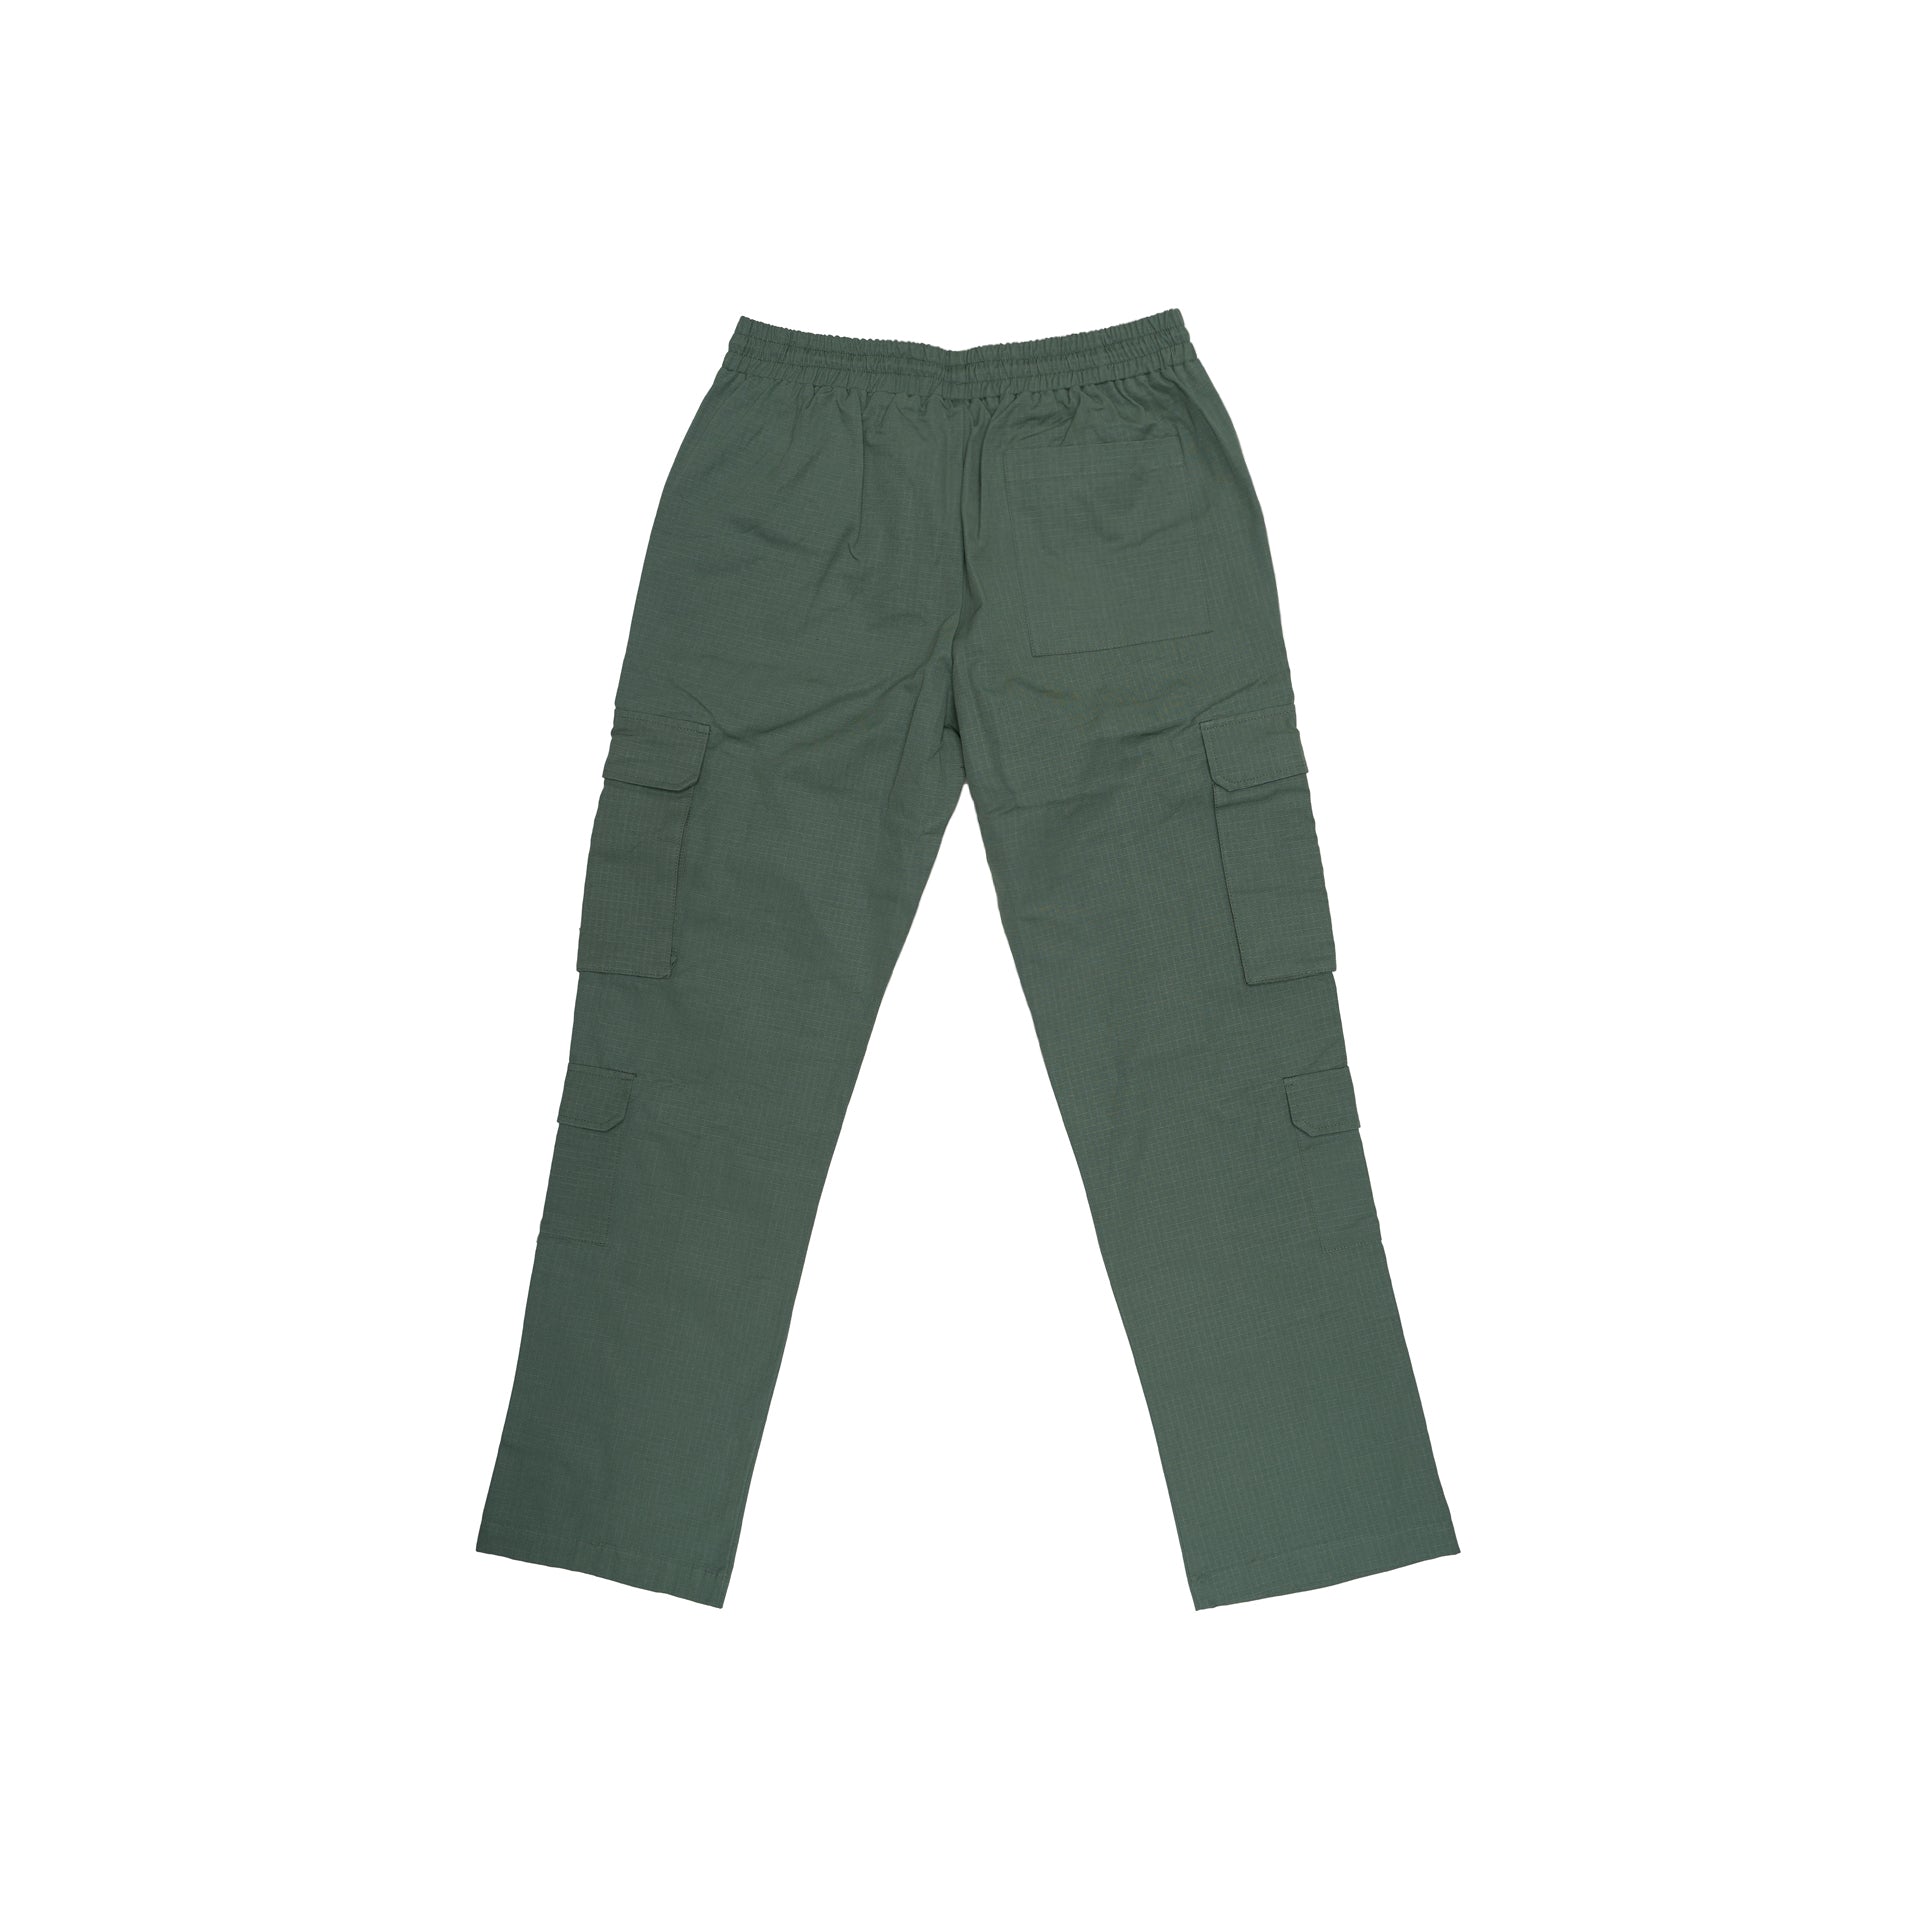 Green Cargo Pants by Brandtionary